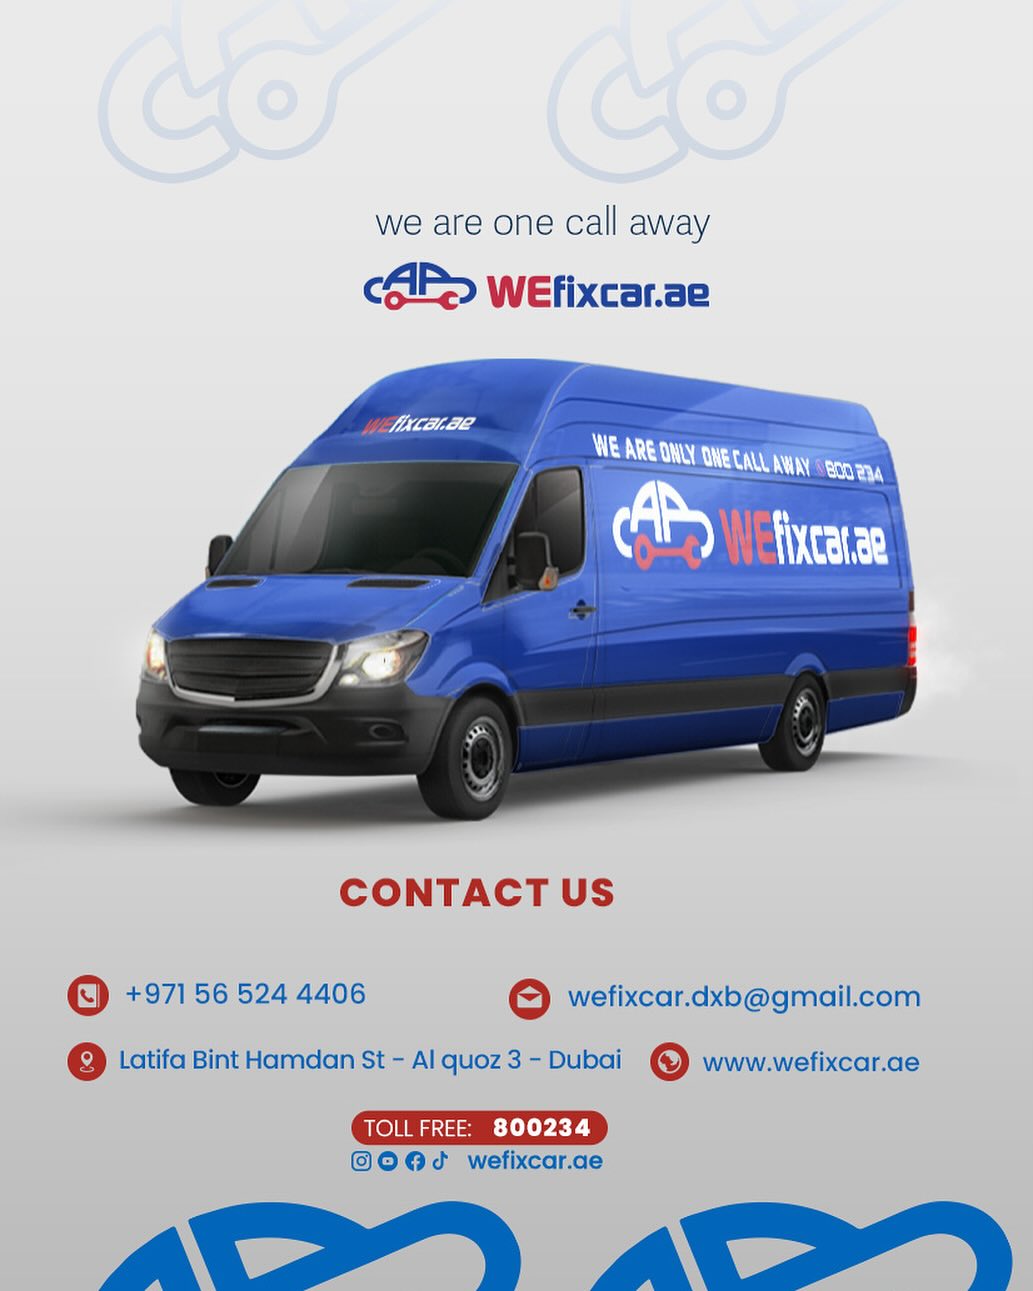 Discover the Ultimate in Car Care with We Fix Car: Your Premier Mobile Car Repair Solution